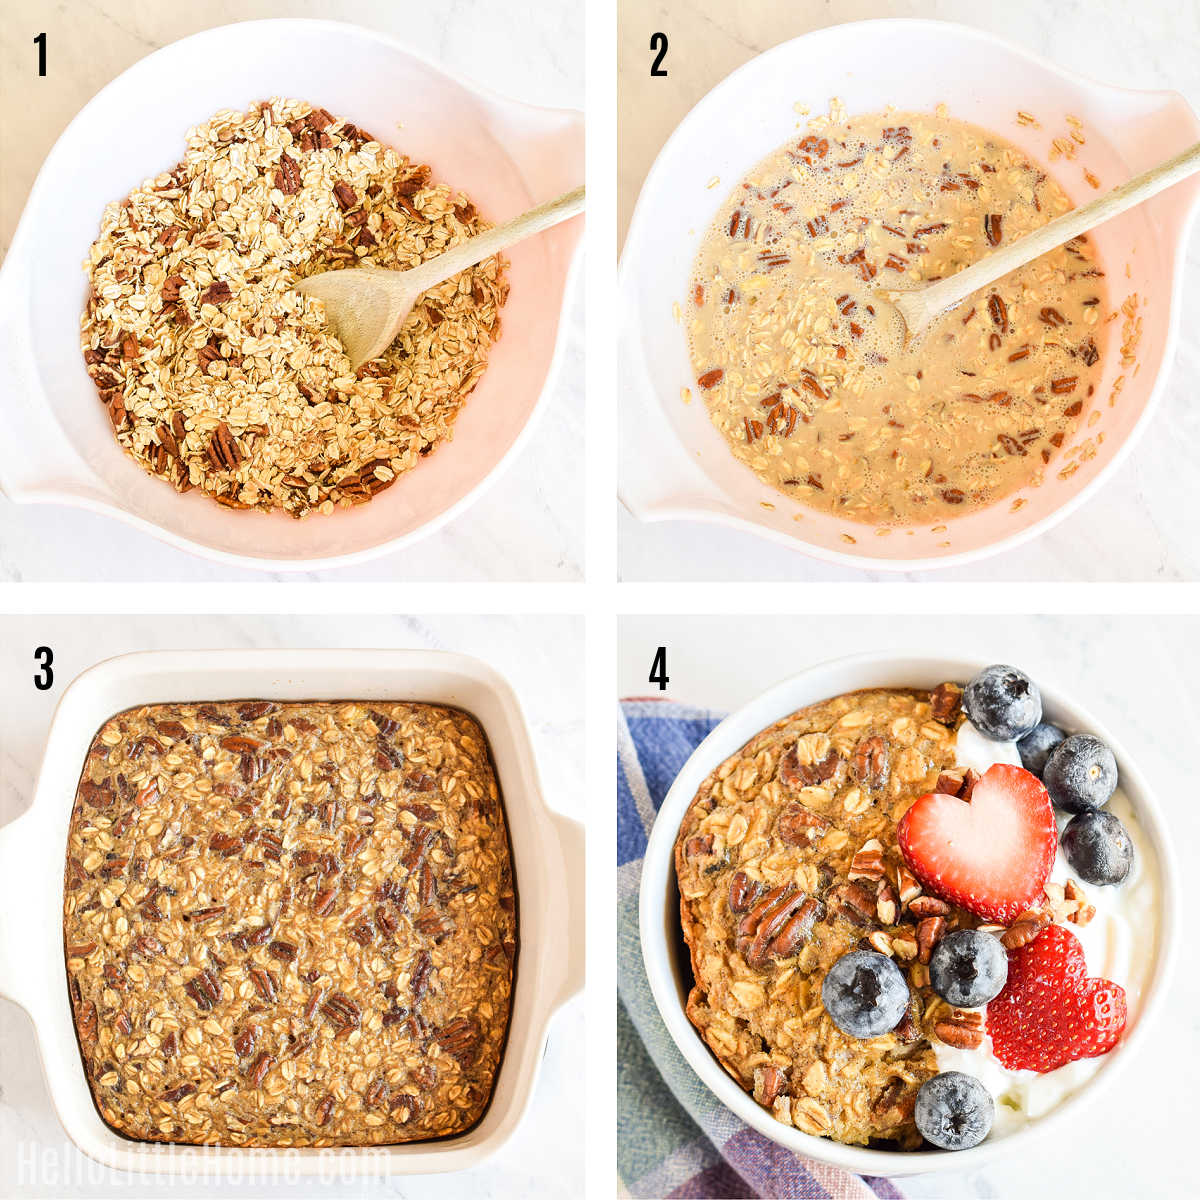 A photo collage showing how to make baked oatmeal step-by-step.